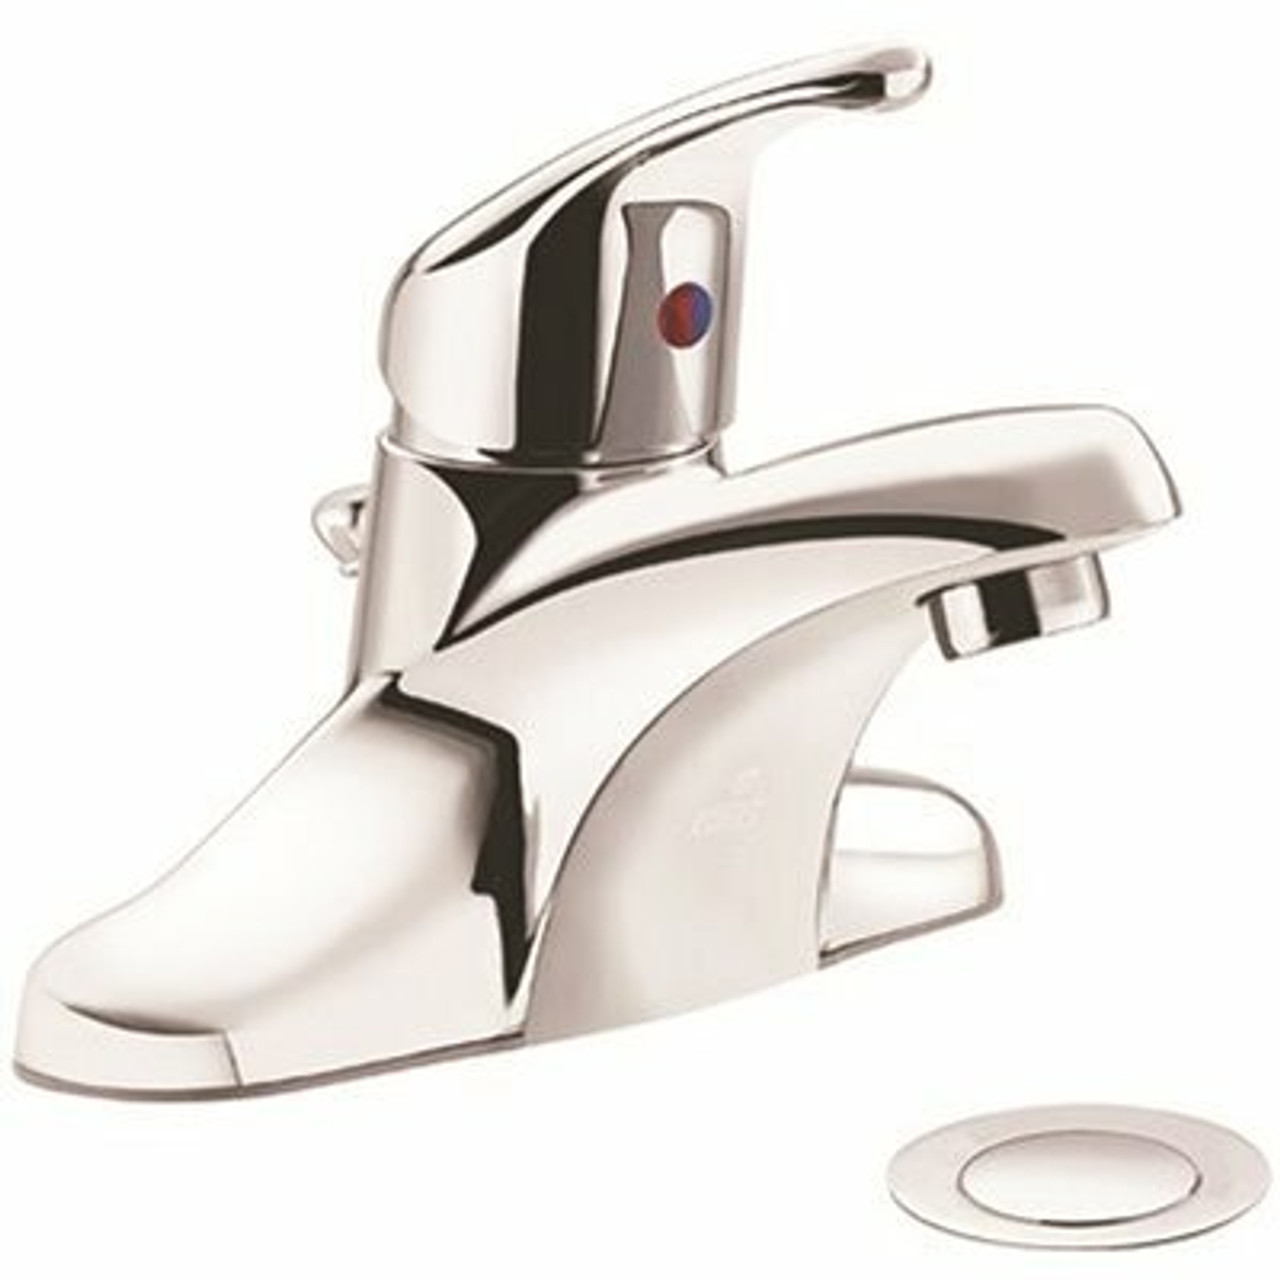 Cleveland Faucet Group Cornerstone 4 In Centerset Single-Handle Bathroom Faucet With Drain Assembly In Chrome